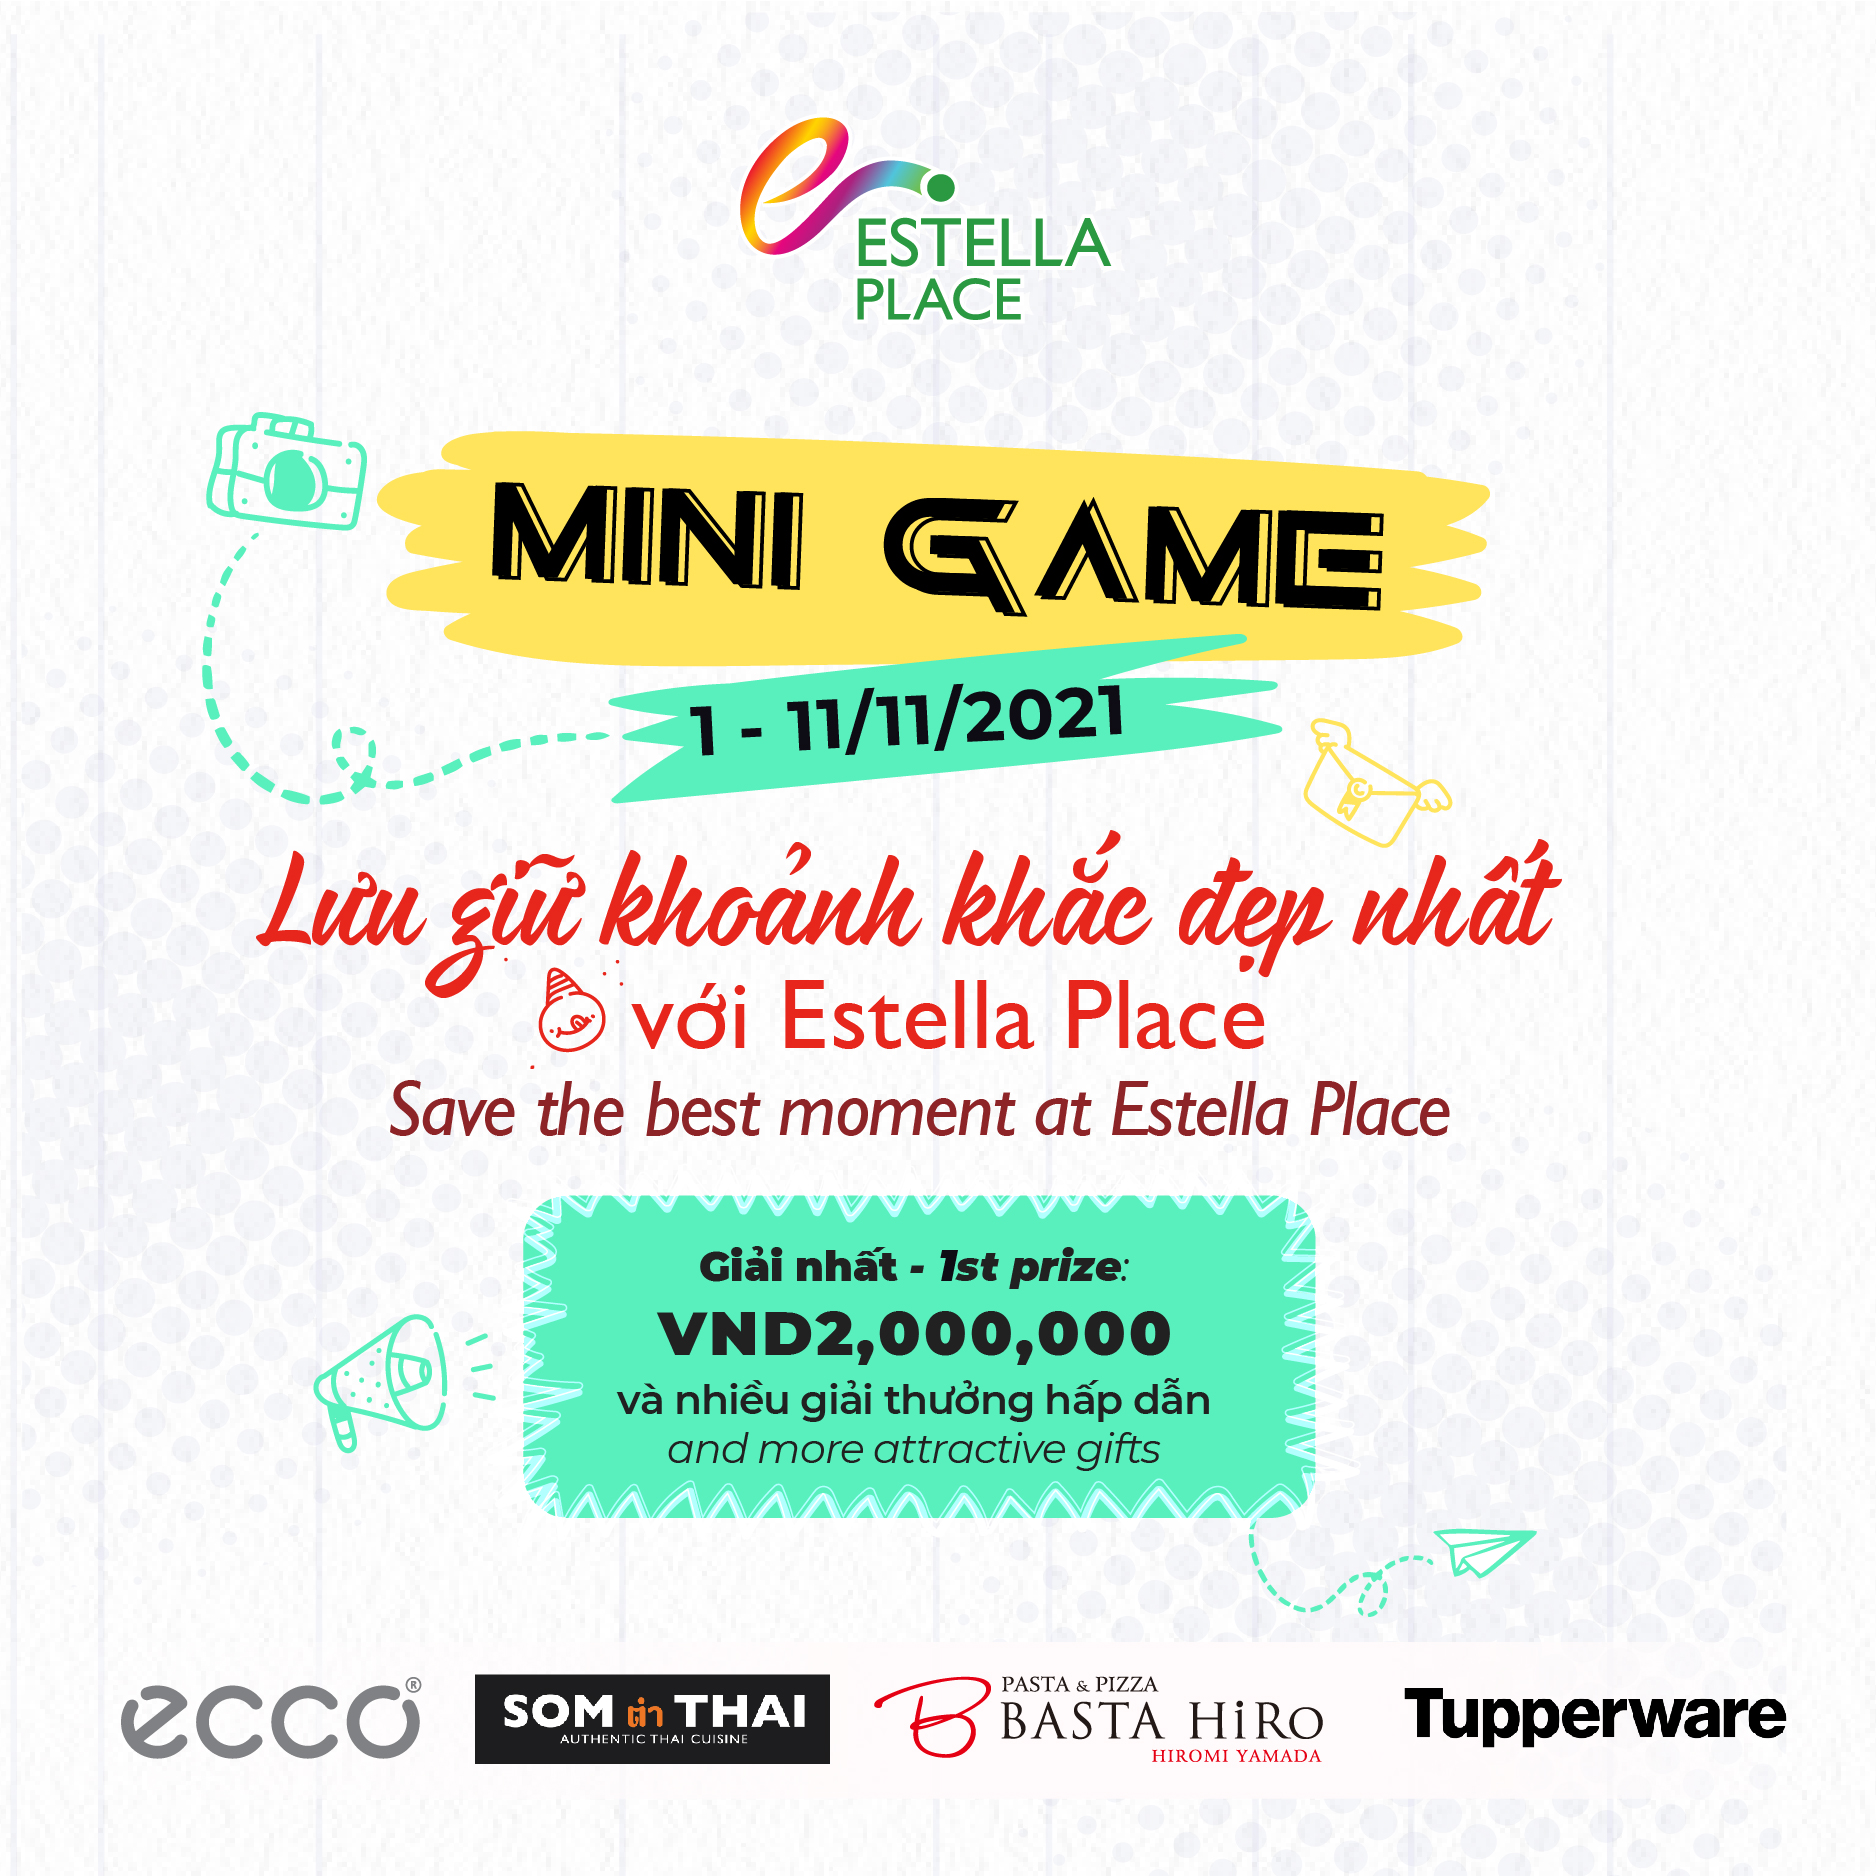 MINI GAME SAVE THE BEST MOMENT WITH ESTELLA PLACE